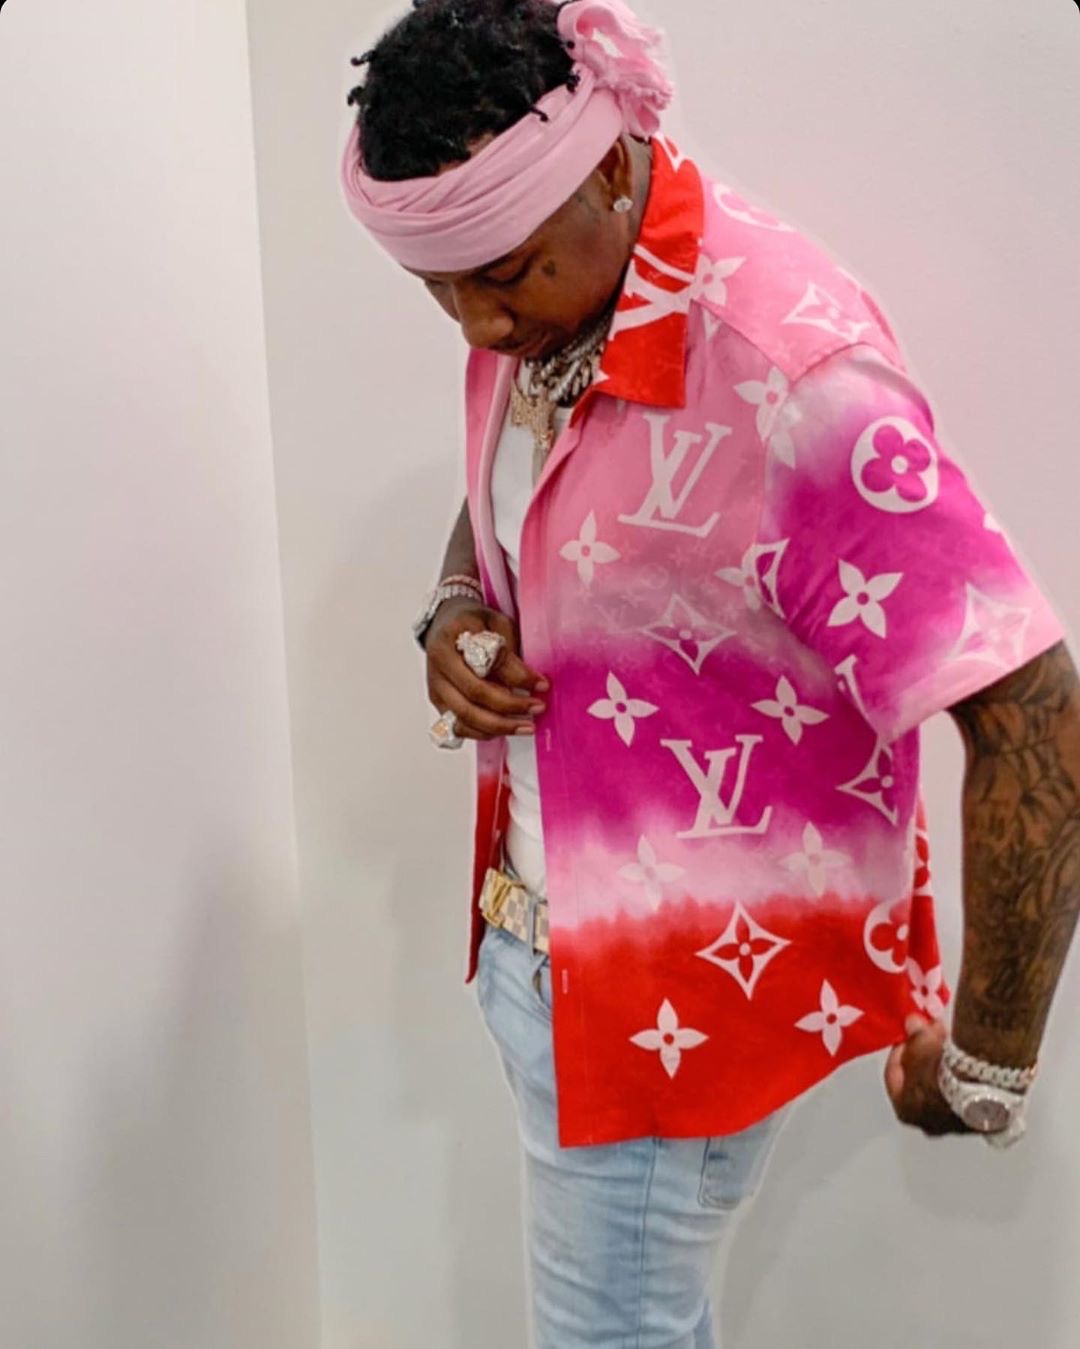 Moneybagg Yo Outfit from October 26, 2020